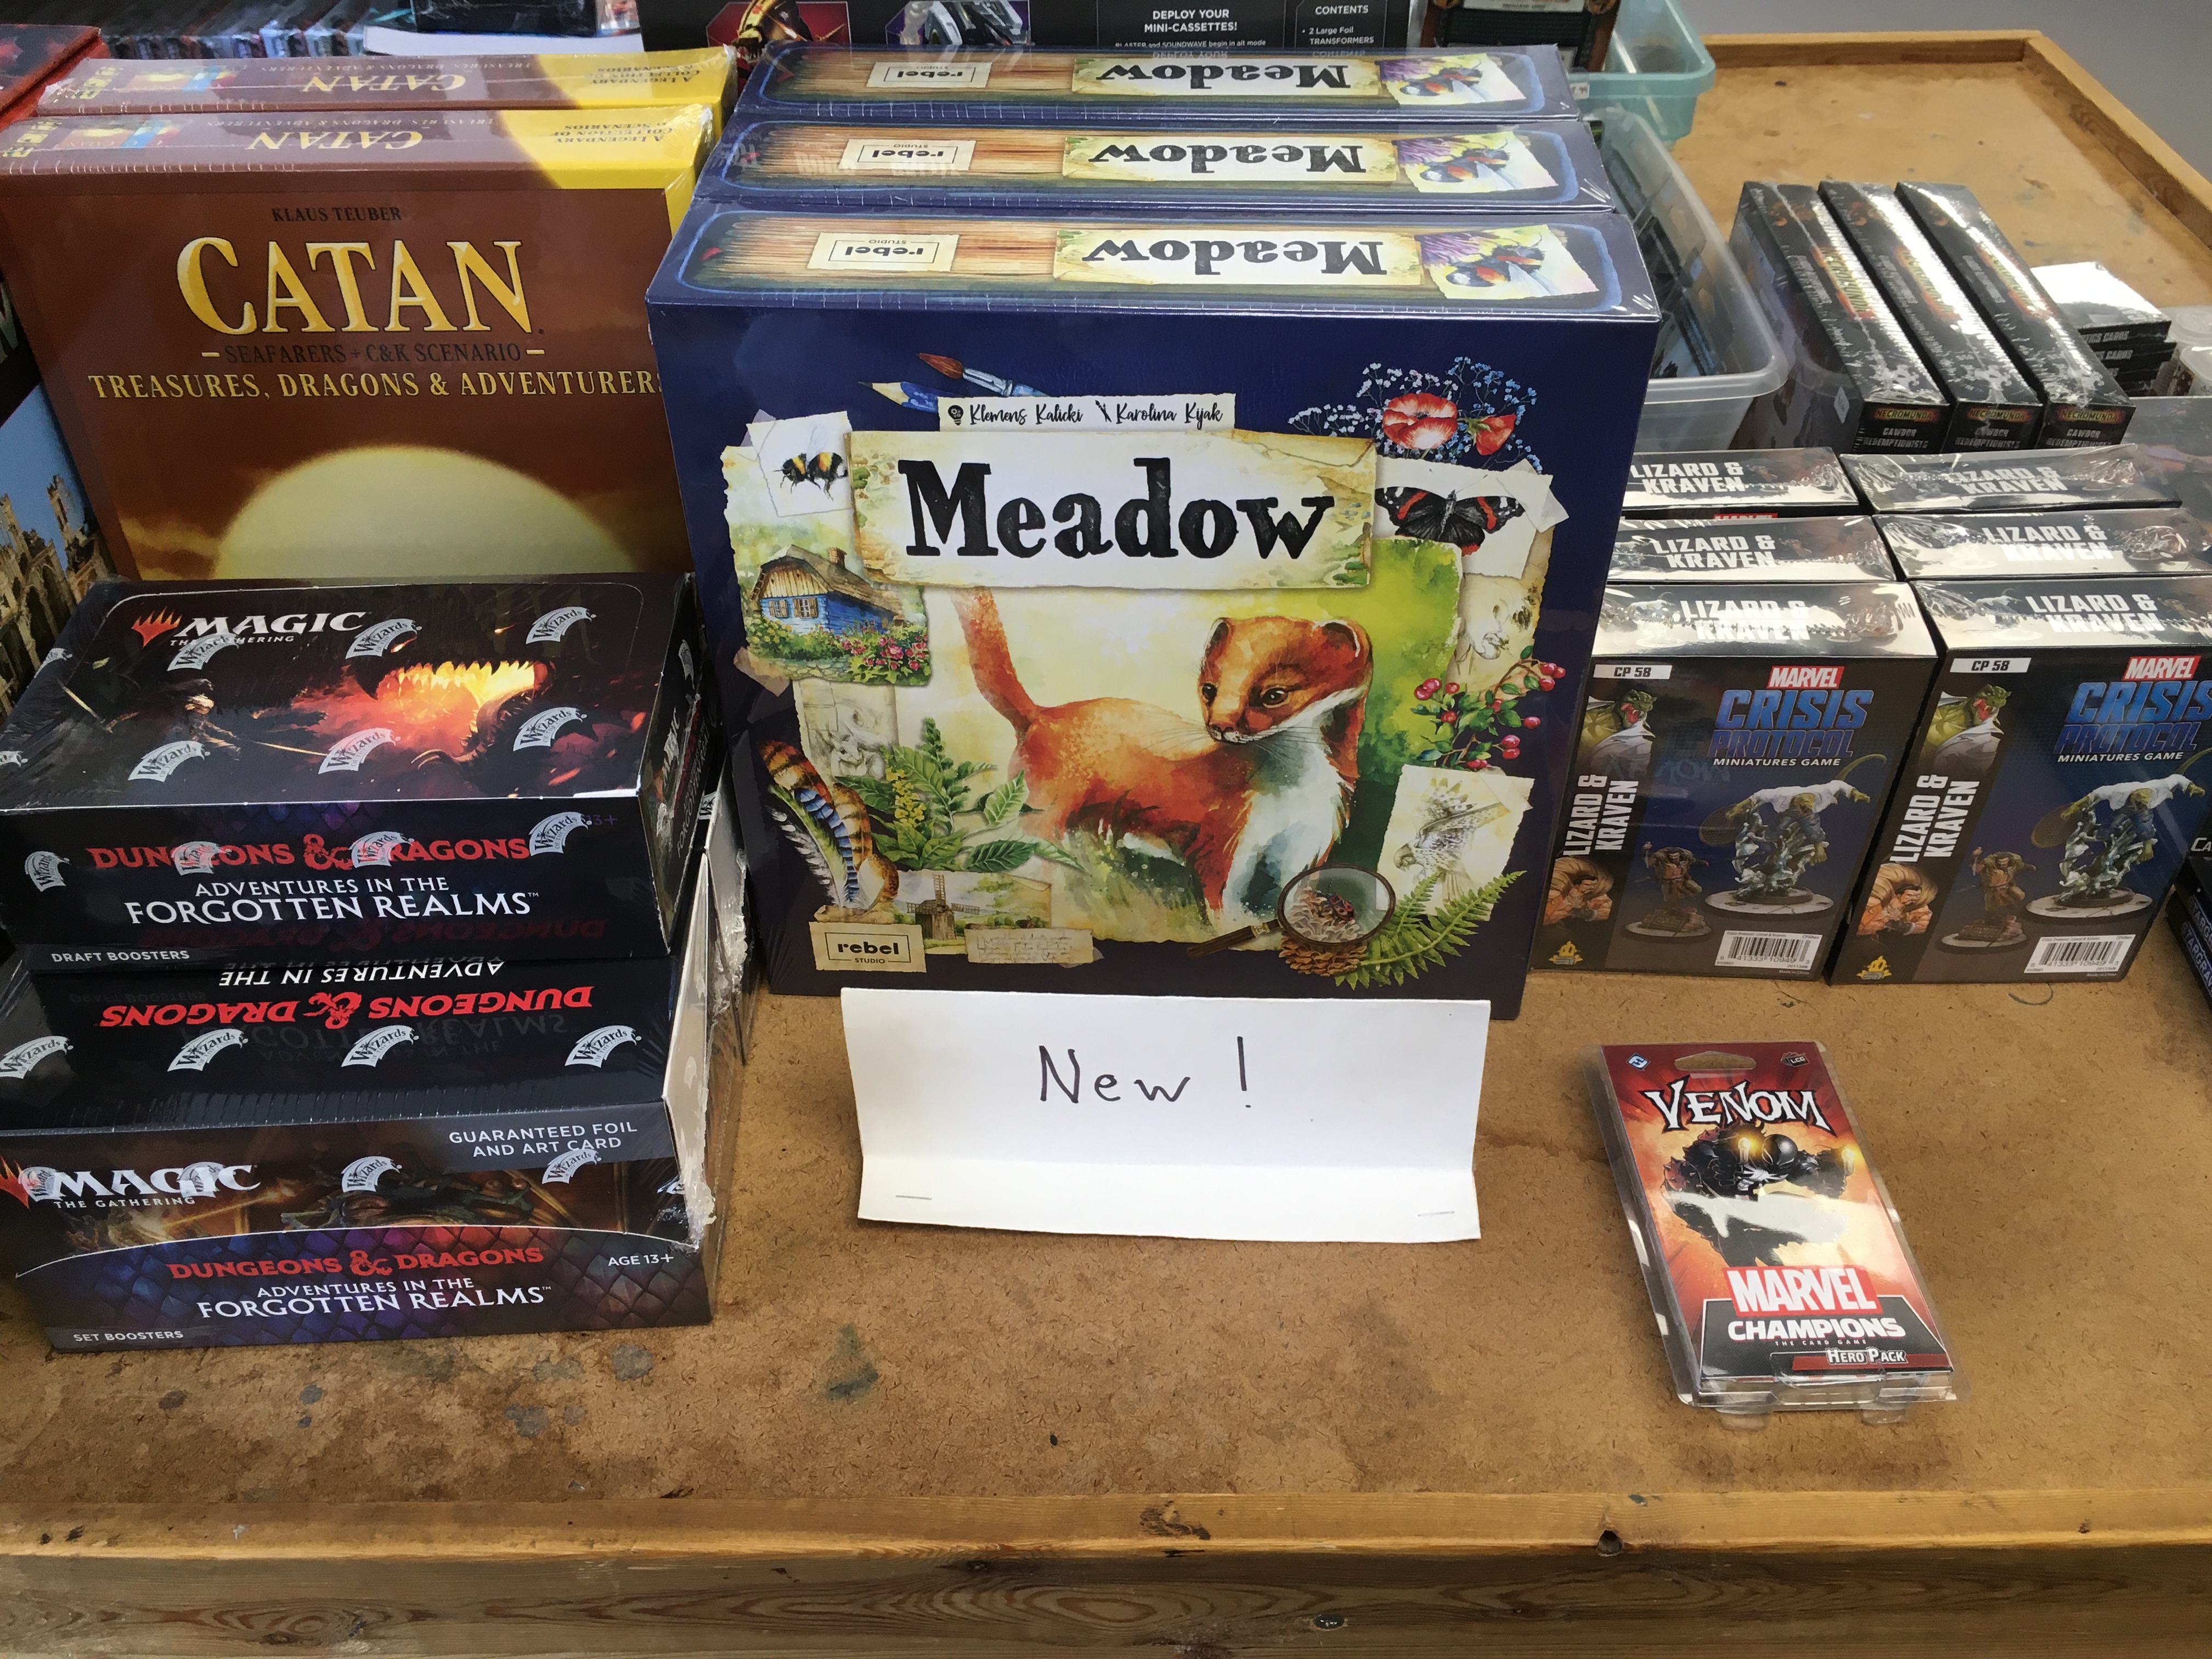 Marvel, MtG Forgotten Realms, and Meadow